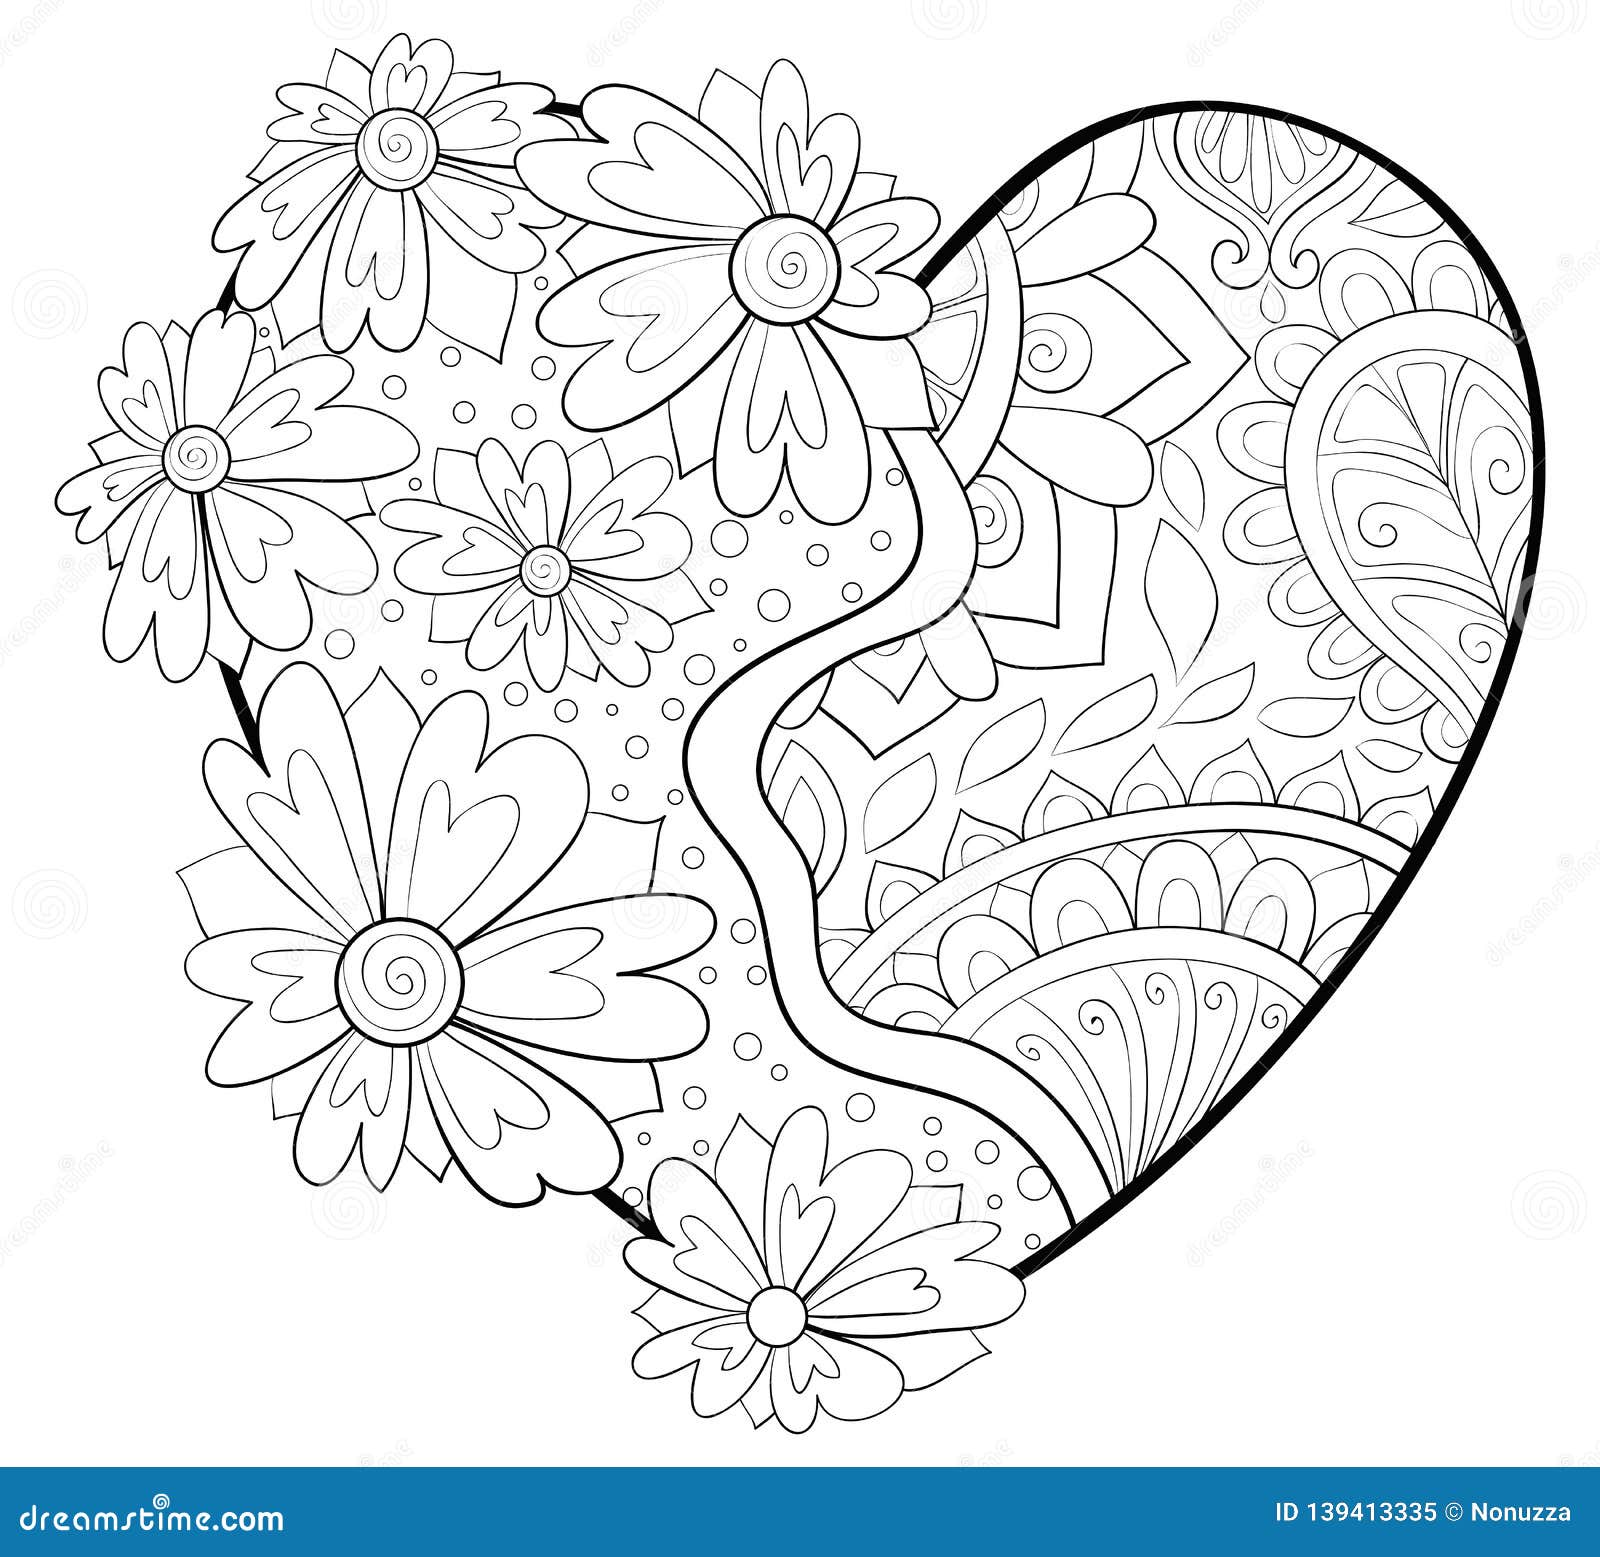 Adult coloring bookpage a valentines day heart image for relaxingzen art style illustration stock vector